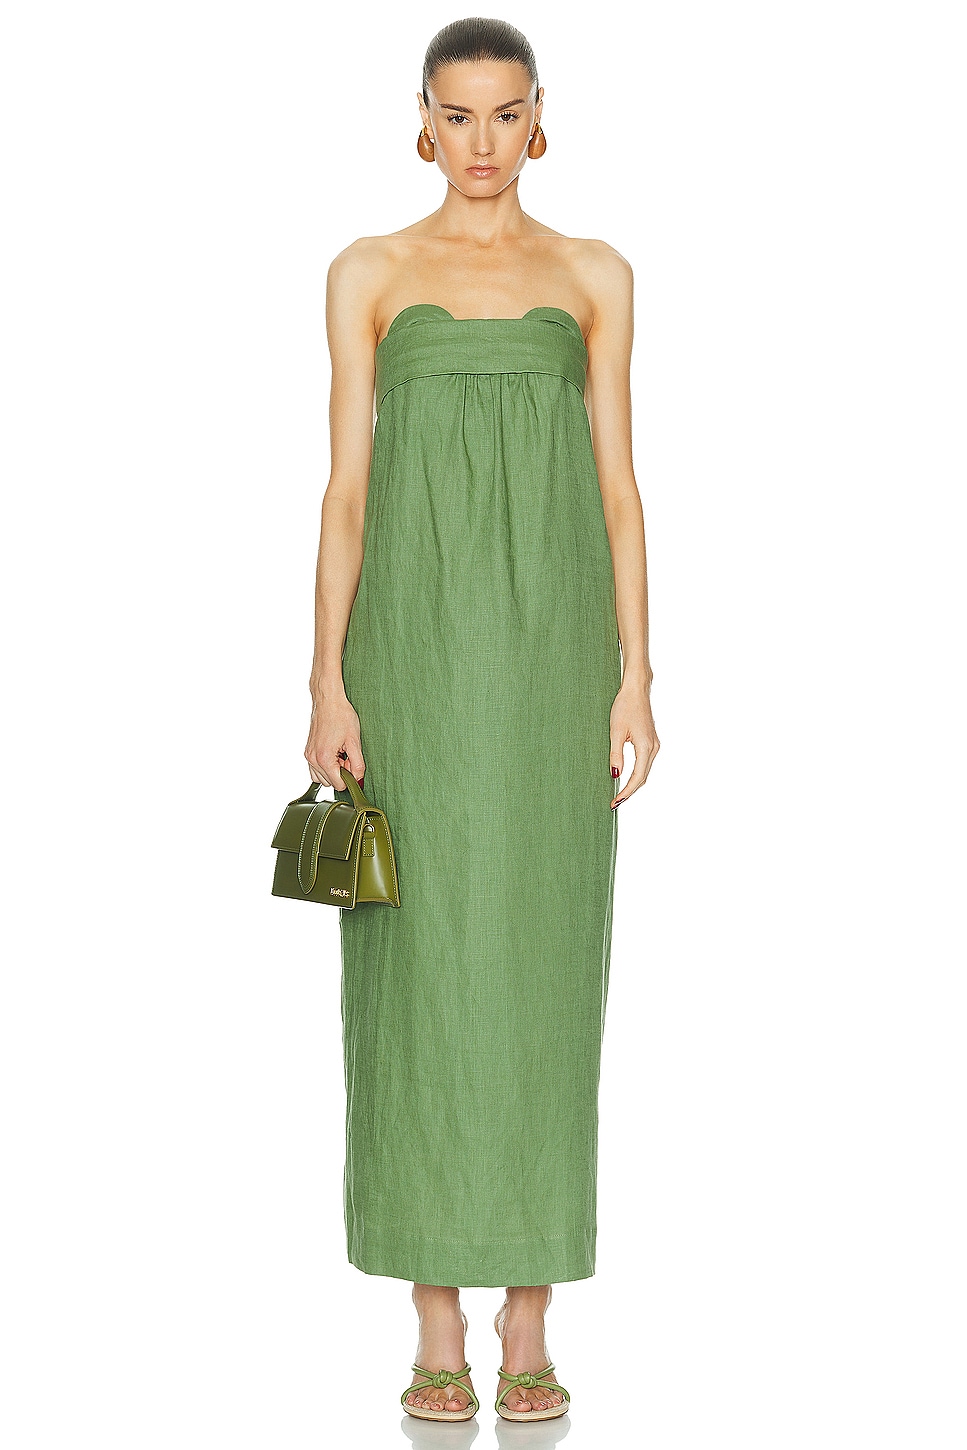 Jellyfish Solid Strapless Long Dress in Green